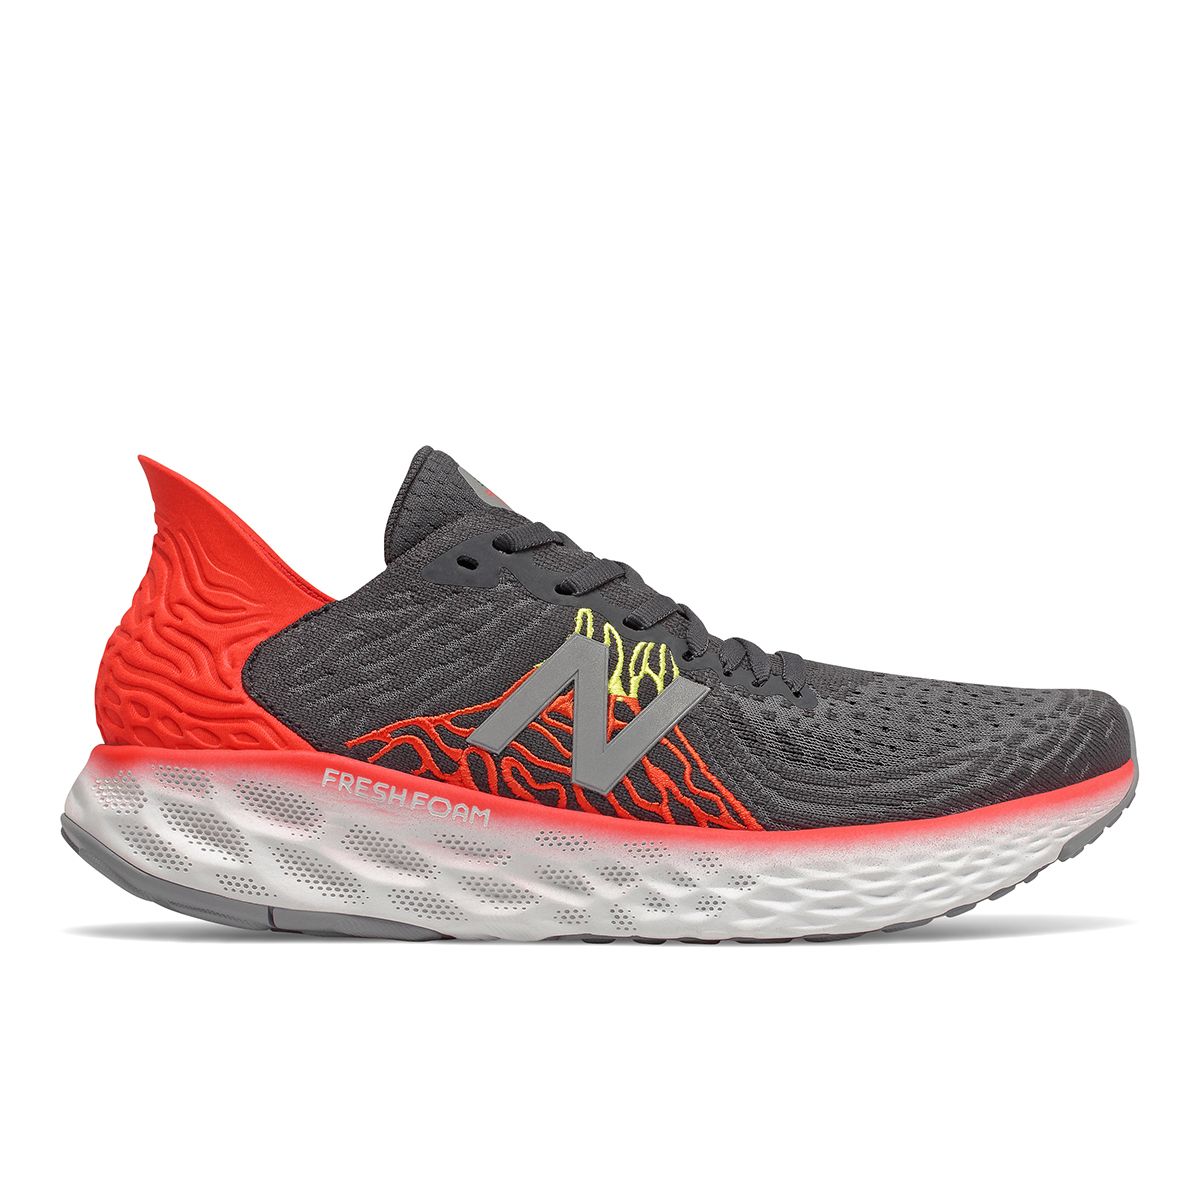 Best road running shoes of 2020 